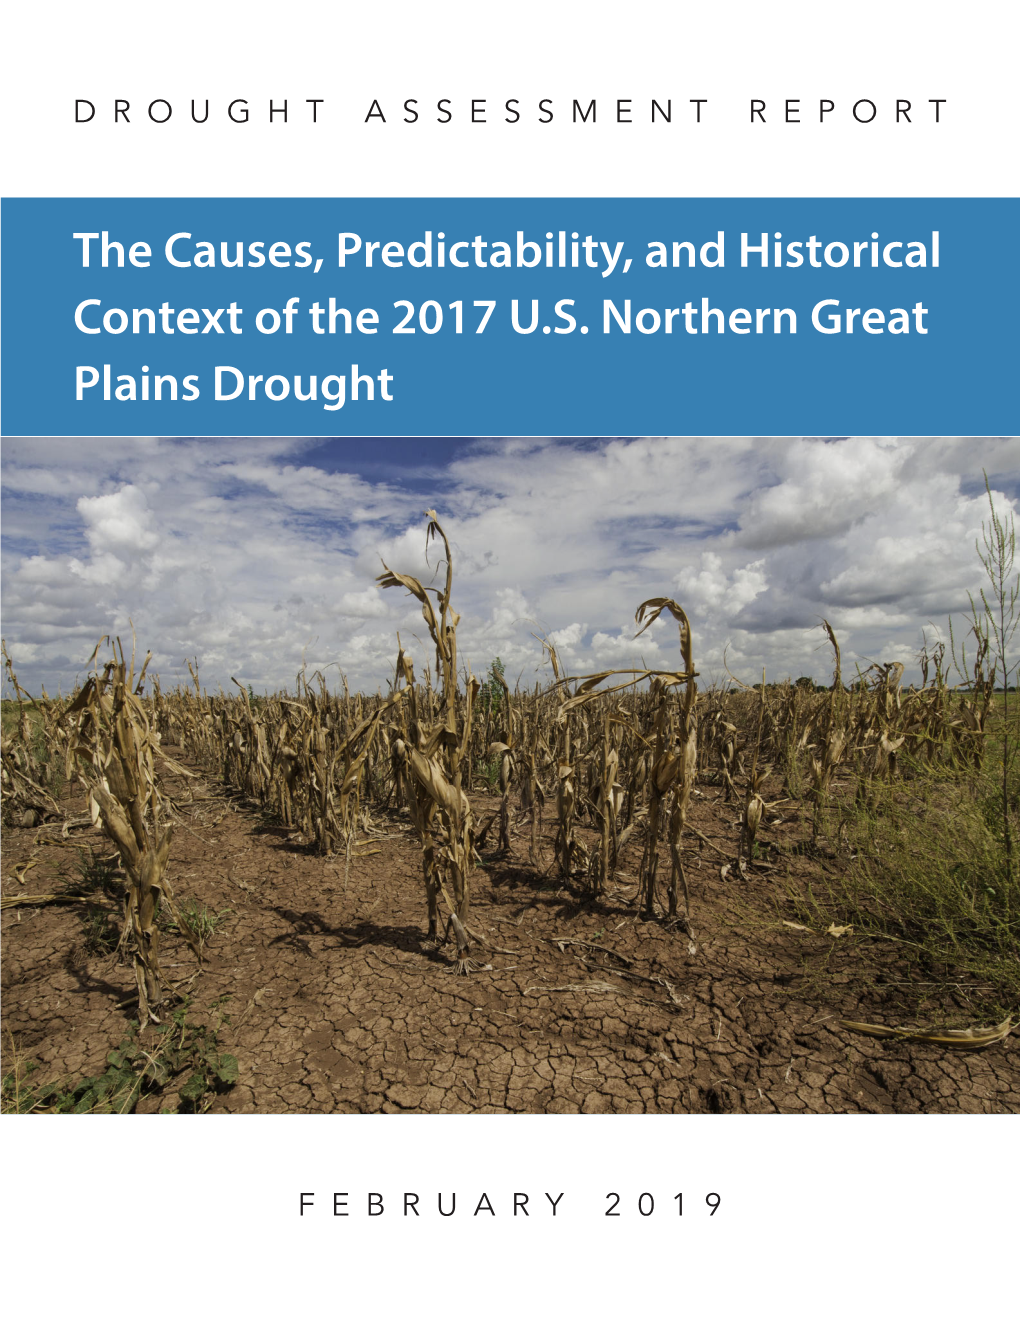 The Causes, Predictability, and Historical Context of the 2017 U.S. Northern Great Plains Drought